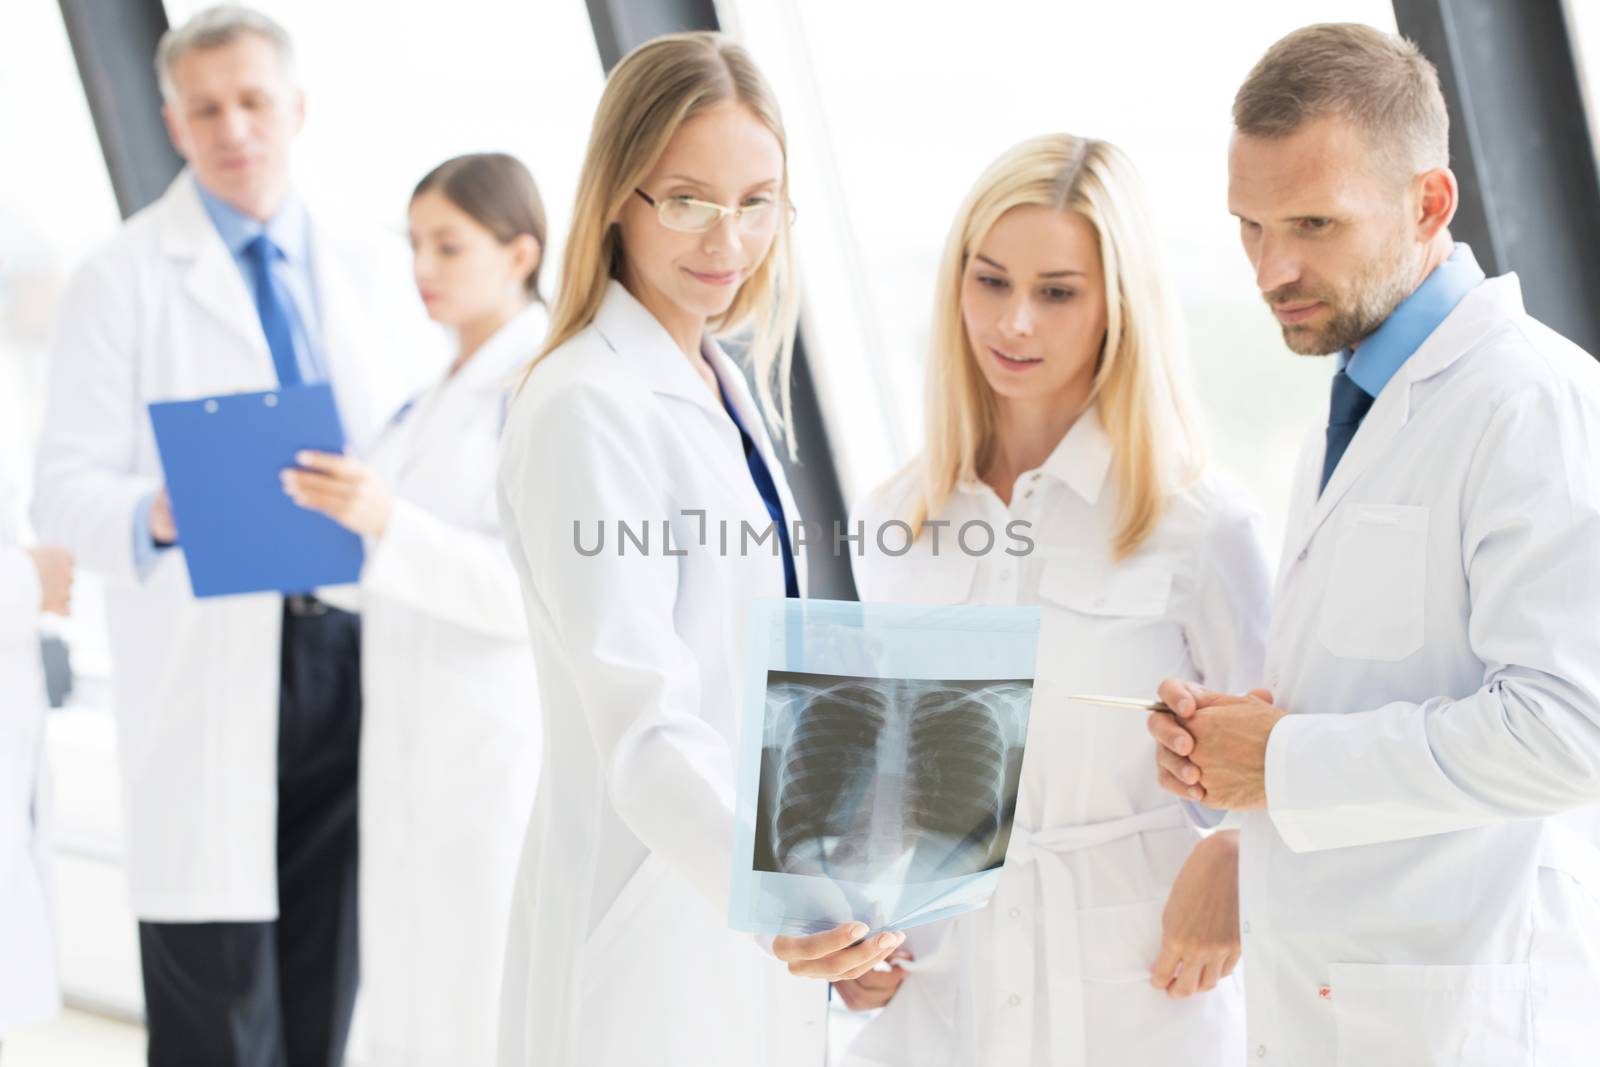 Healthcare, medical and radiology concept - group of doctors looking at x-ray